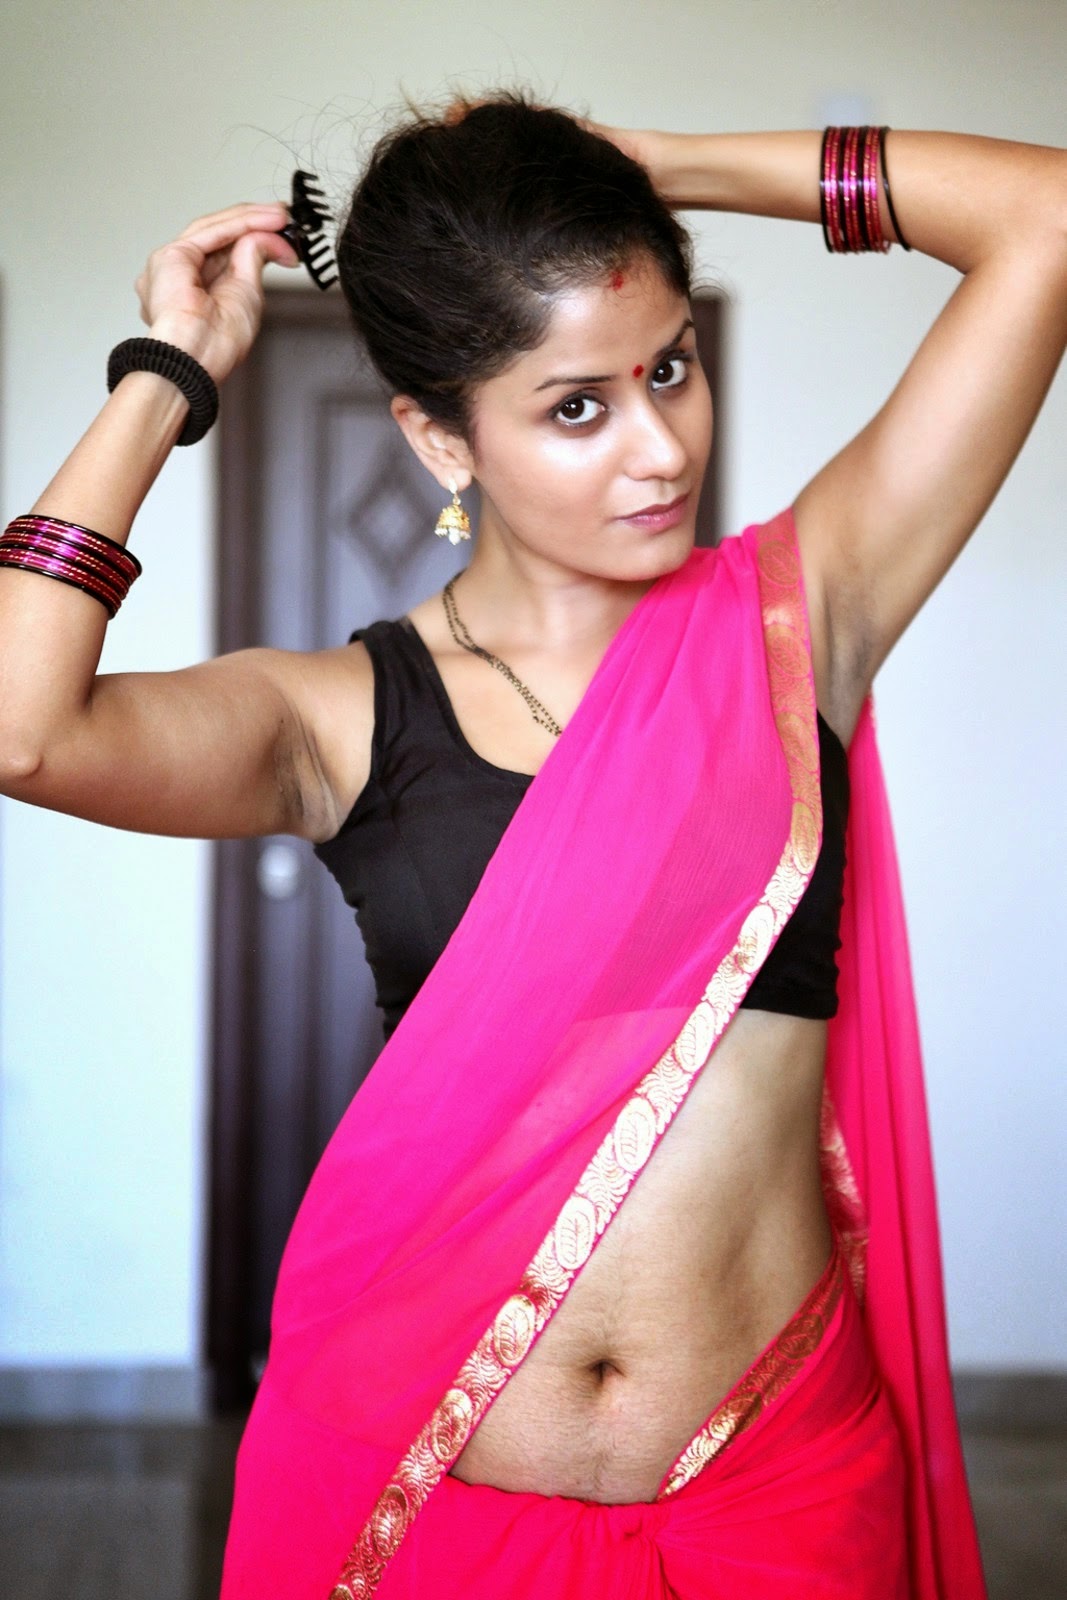 8 Hot Photos Of Indian Housewife In Saree Craziest Photo Collection